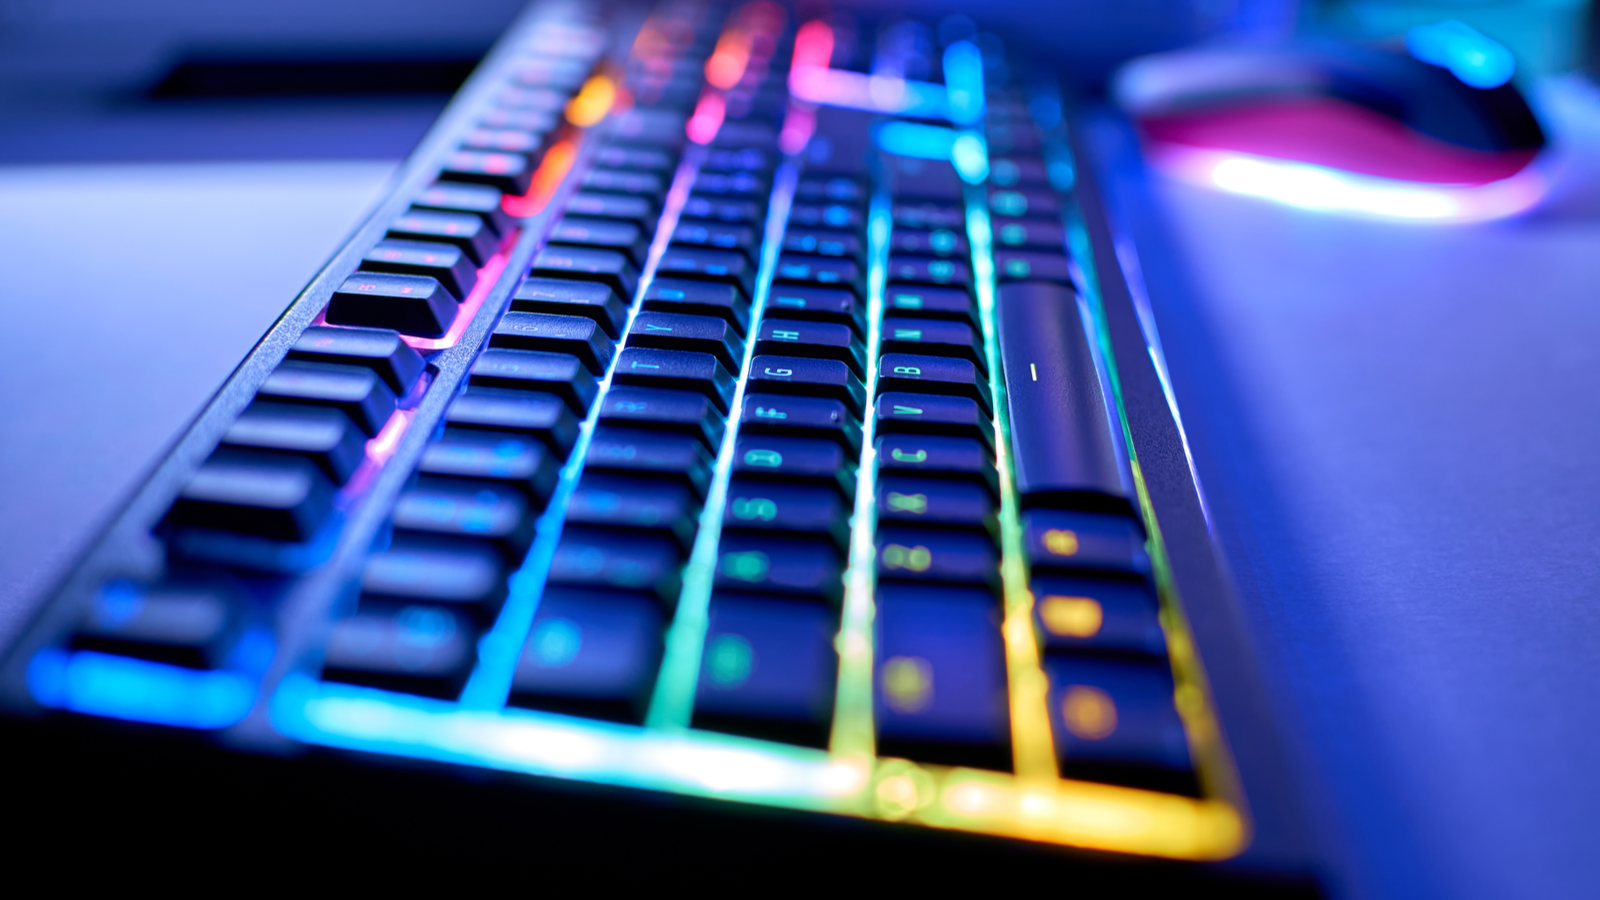 Gaming keyboard with RGB LED light, blurred background, selective focus, bokeh